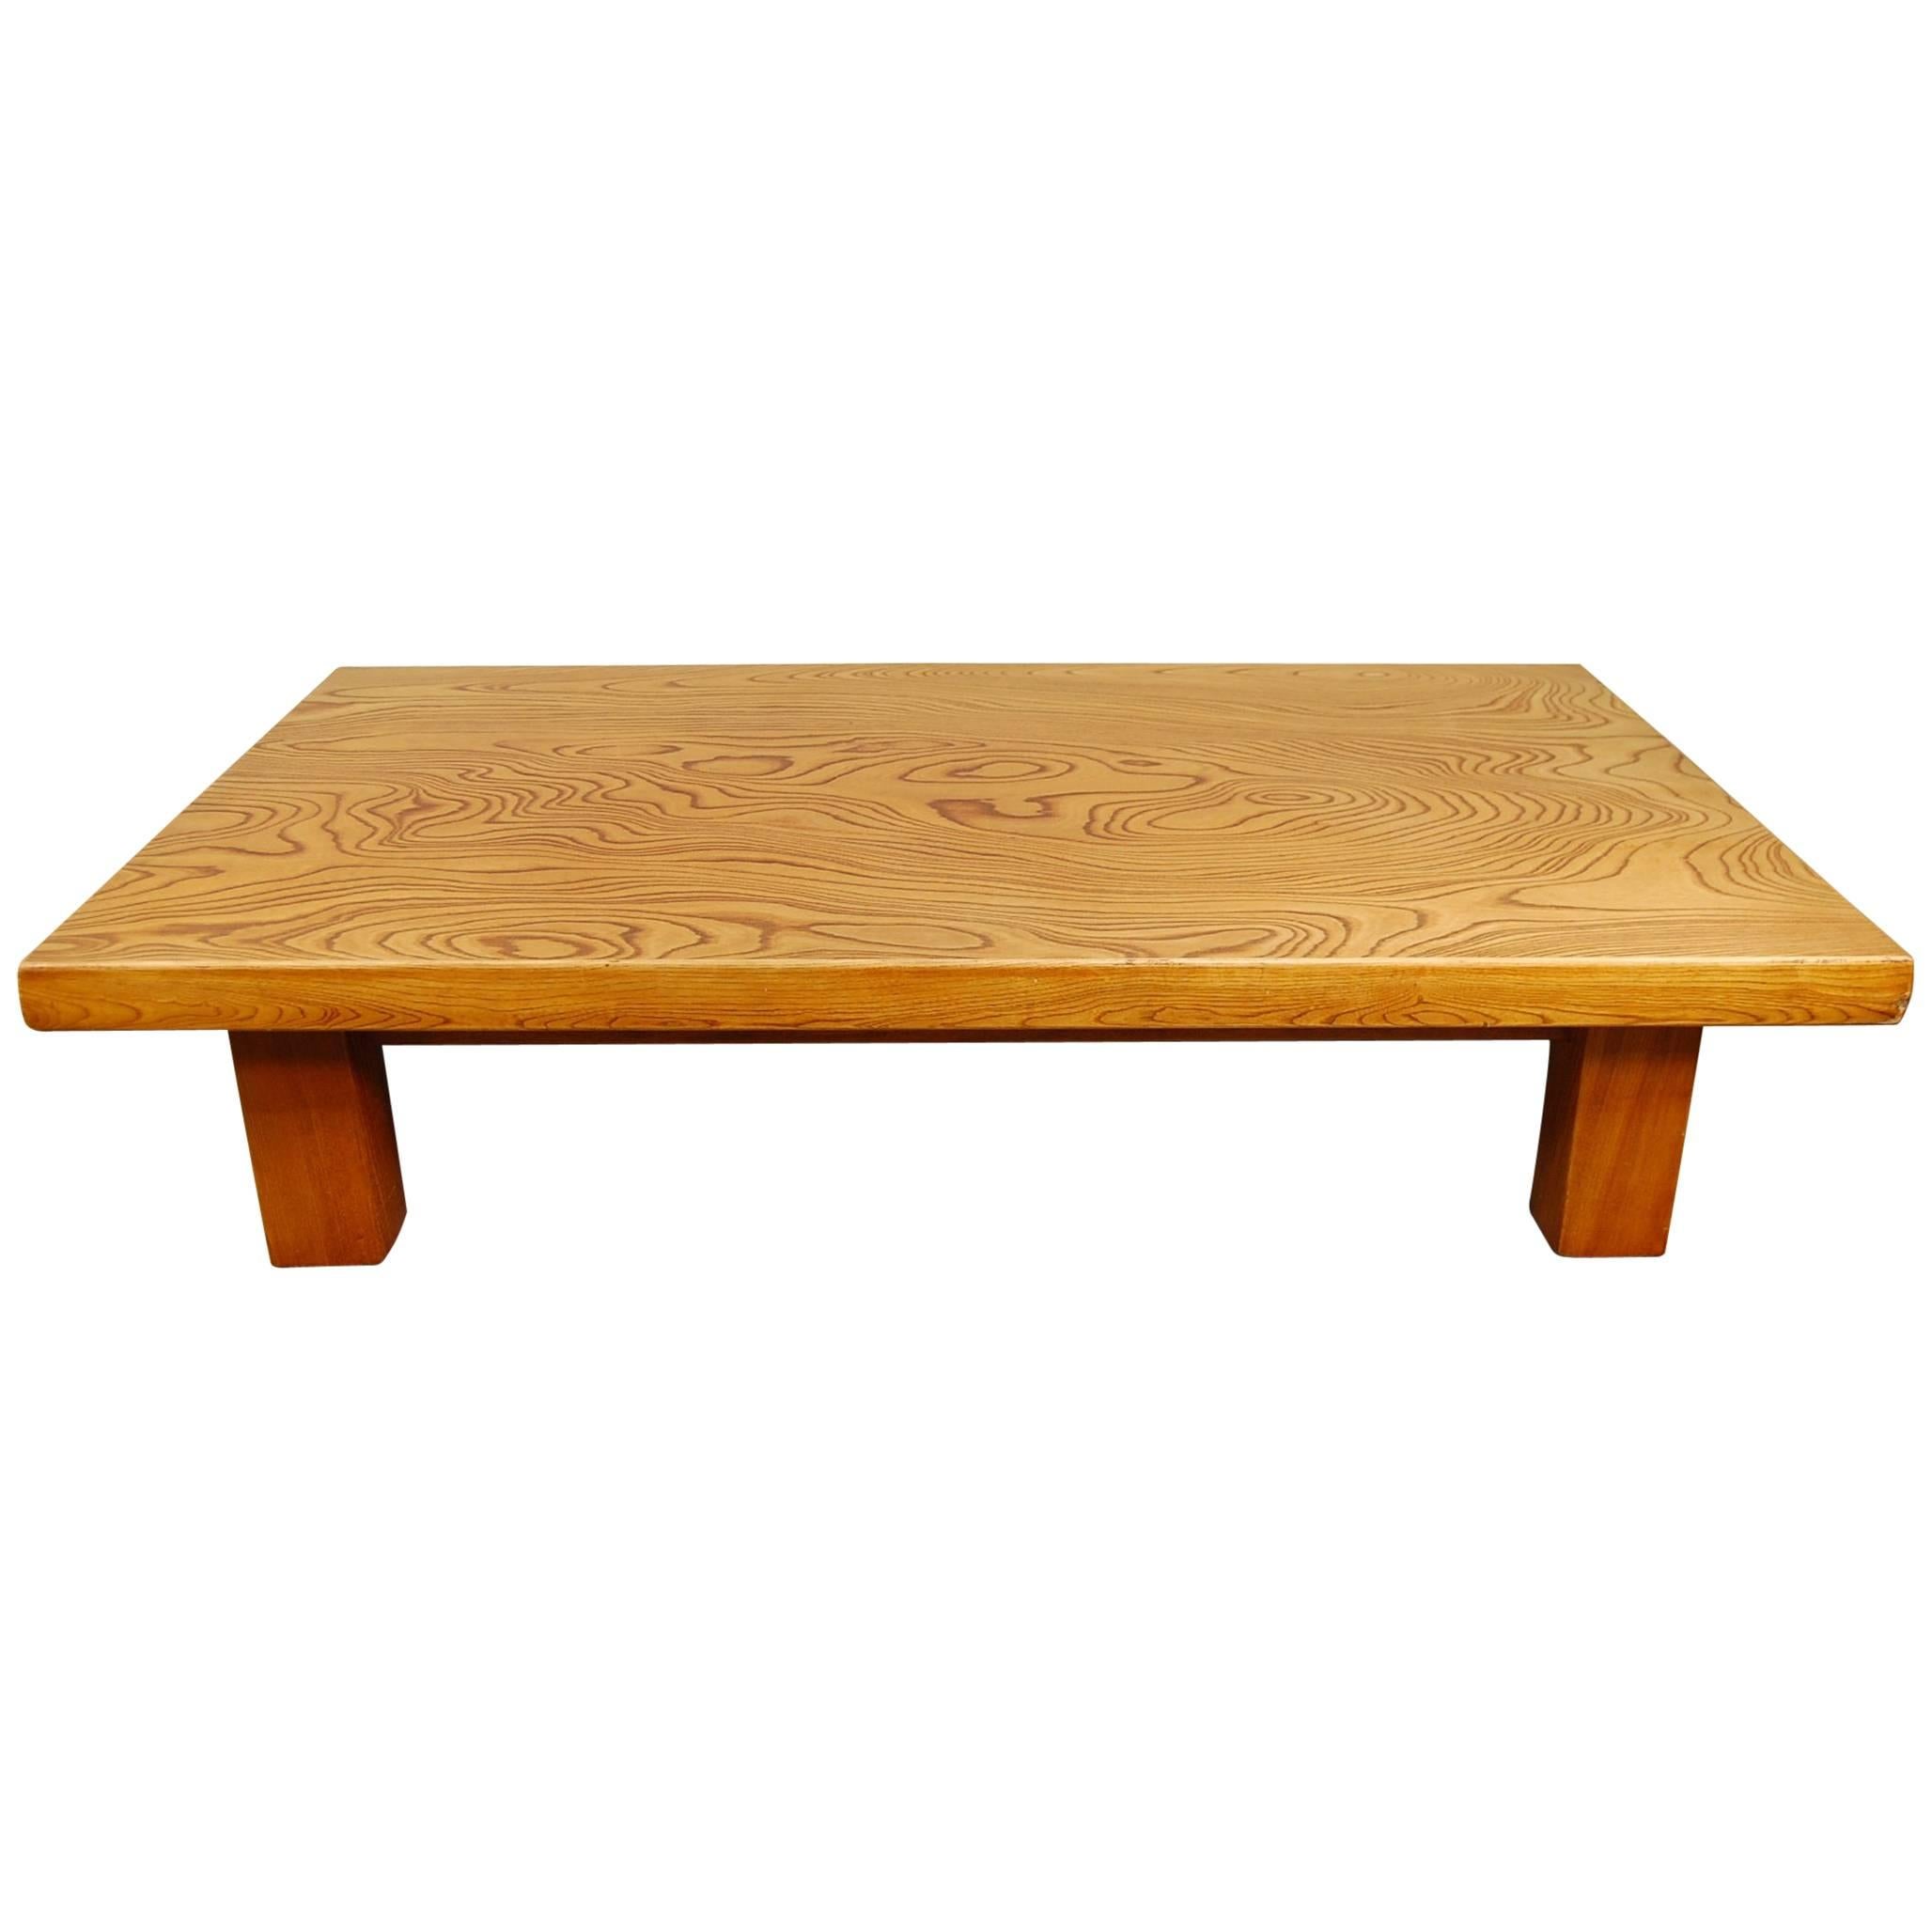 Japanese Low Table in Elm